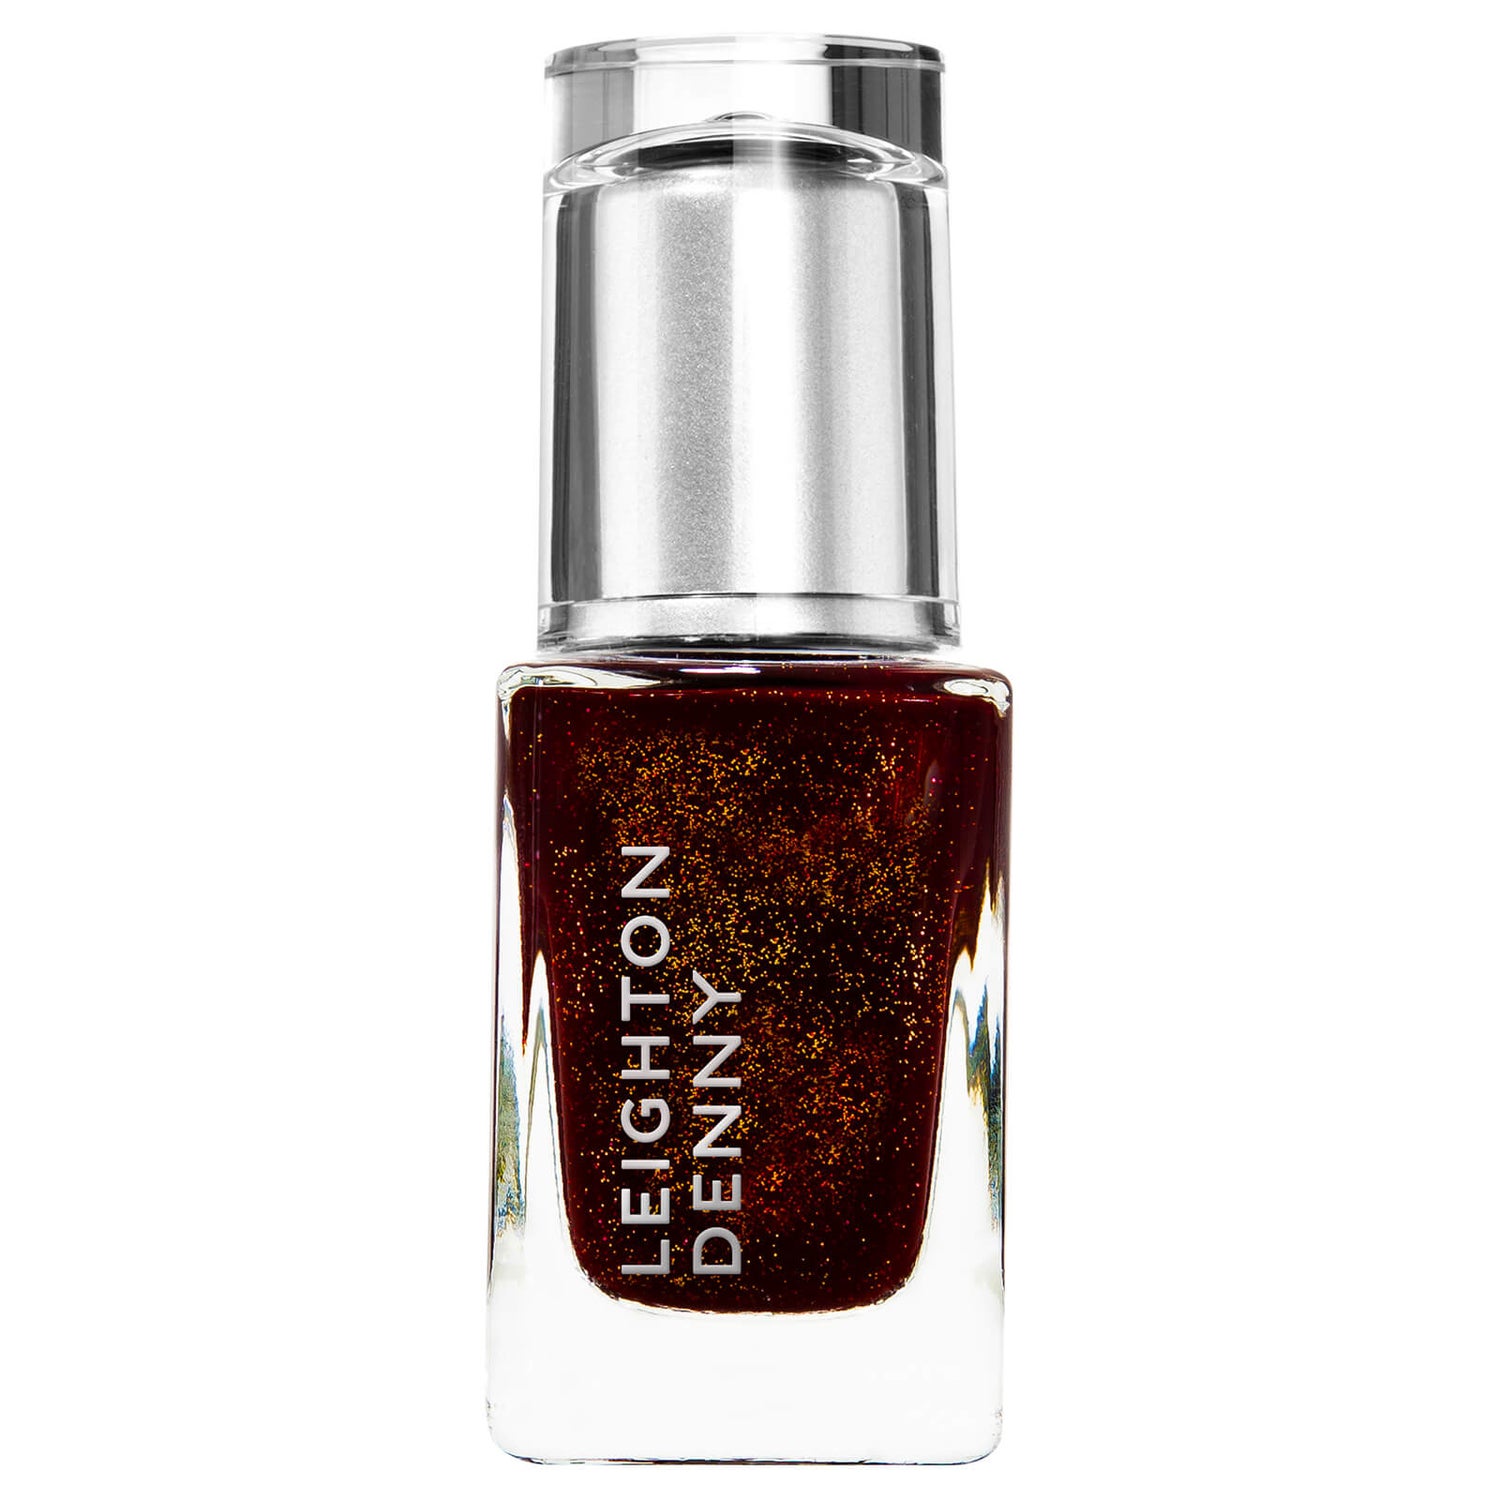 Leighton Denny High Performance Nail Polish 12ml - The Heritage Collection - Pretty in Plaid